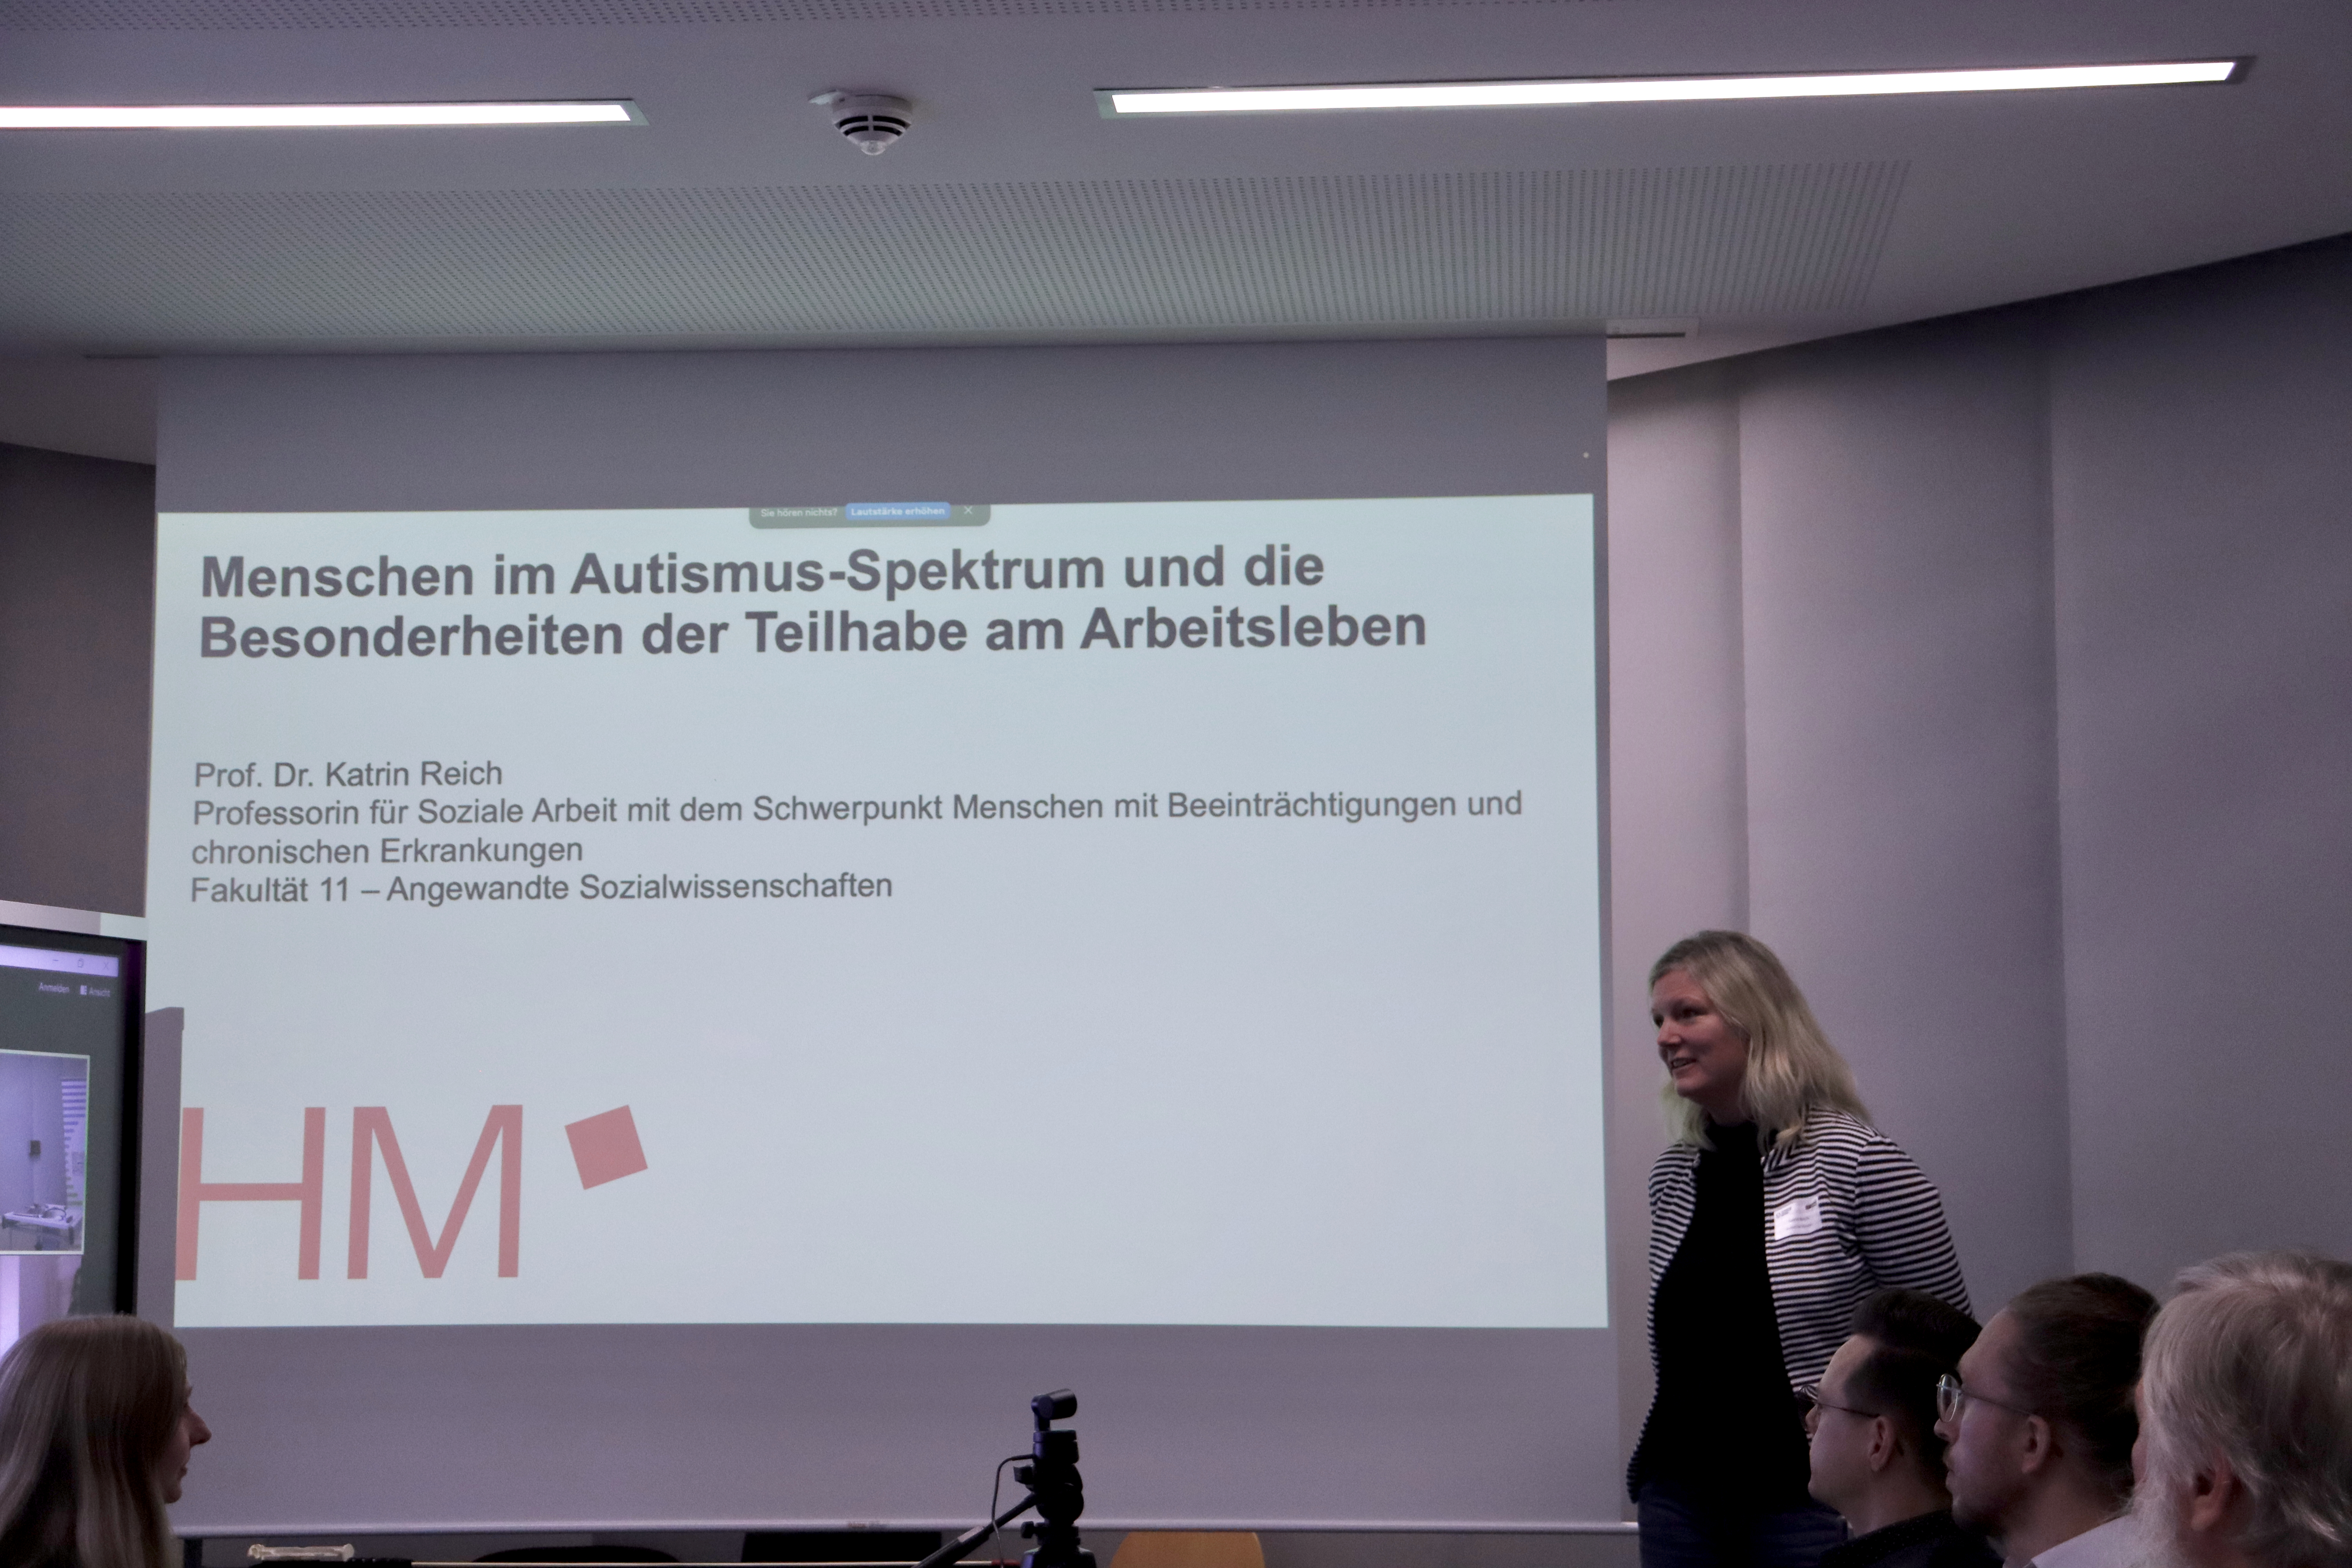 Photo of a PowerPoint presentation on a screen entitled "People on the autism spectrum and the special features of participation in working life". To the right of the presentation is a female person (Katrin Reich) speaking.